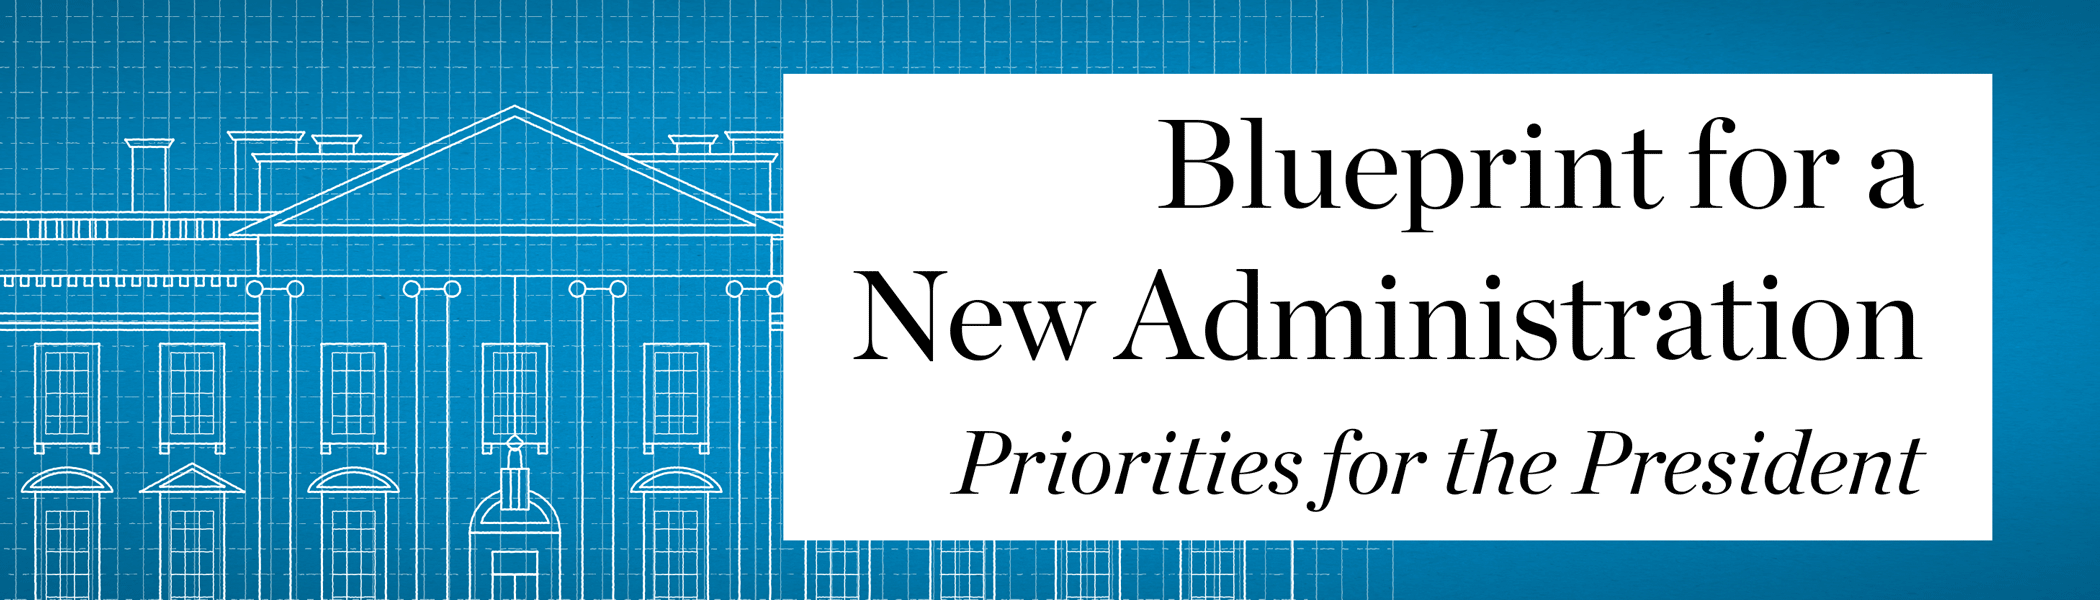 Blueprint for a New Administration